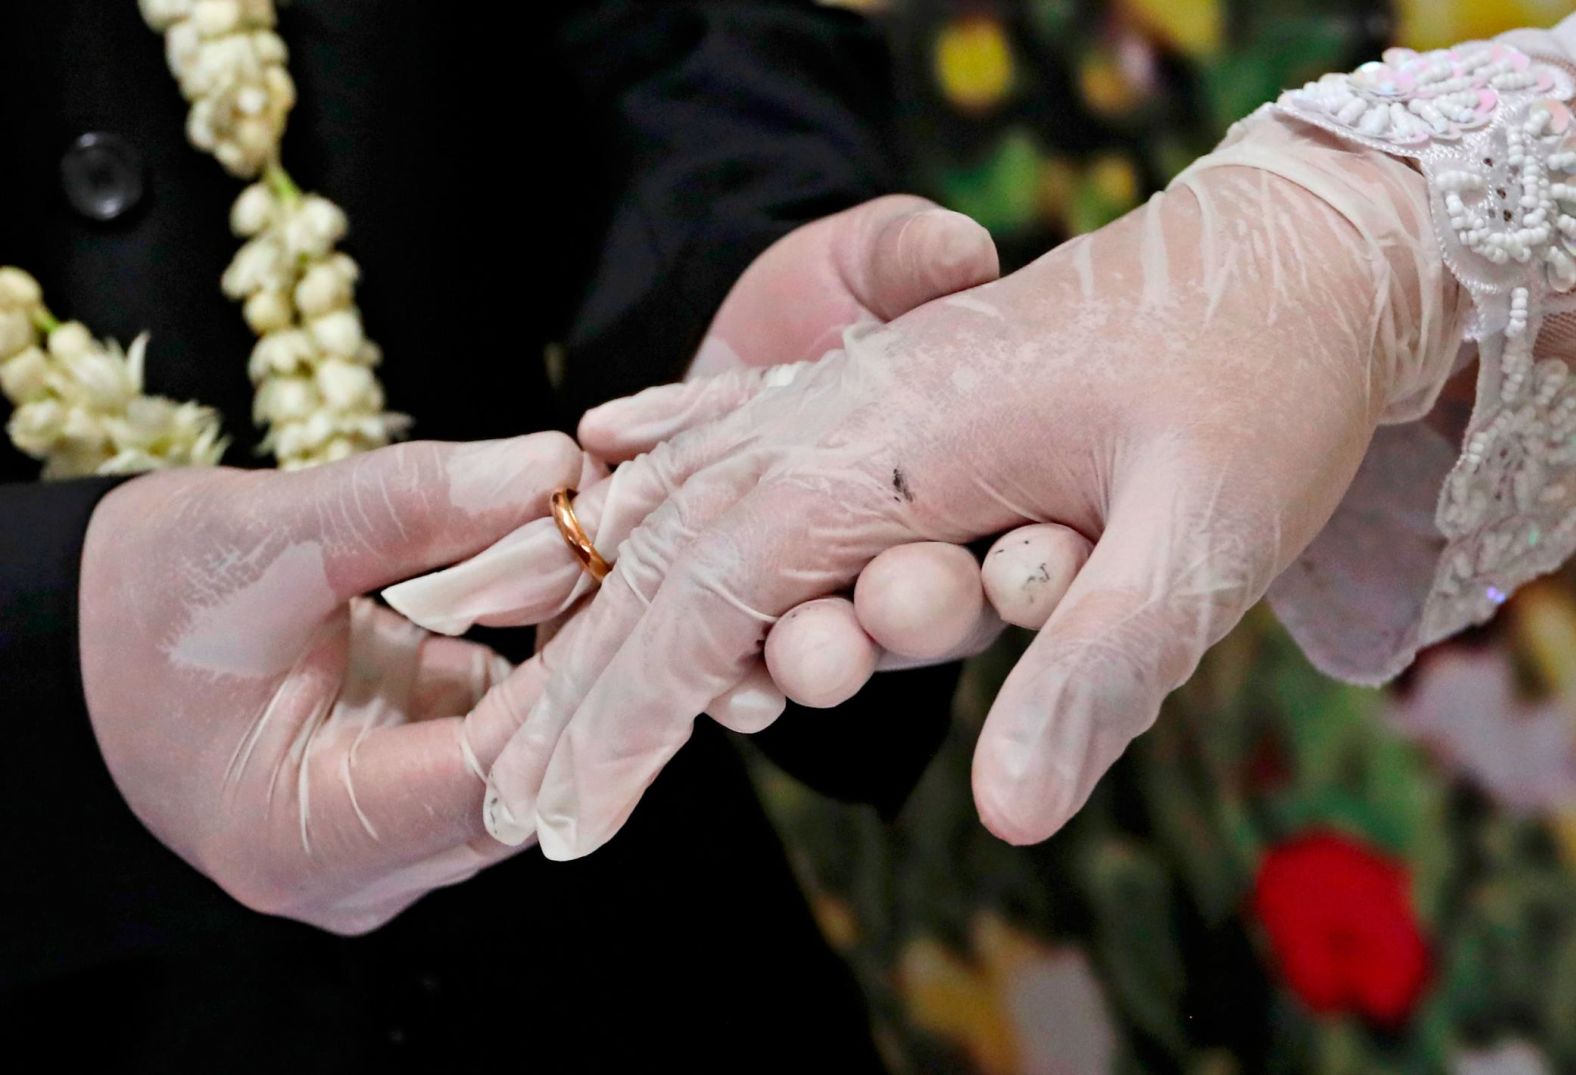 Octavianus Kristianto puts a ring on his new bride, Elma Divani, during their wedding ceremony in Pamulang, Indonesia, on June 19. They were wearing latex gloves to prevent the spread of the coronavirus.